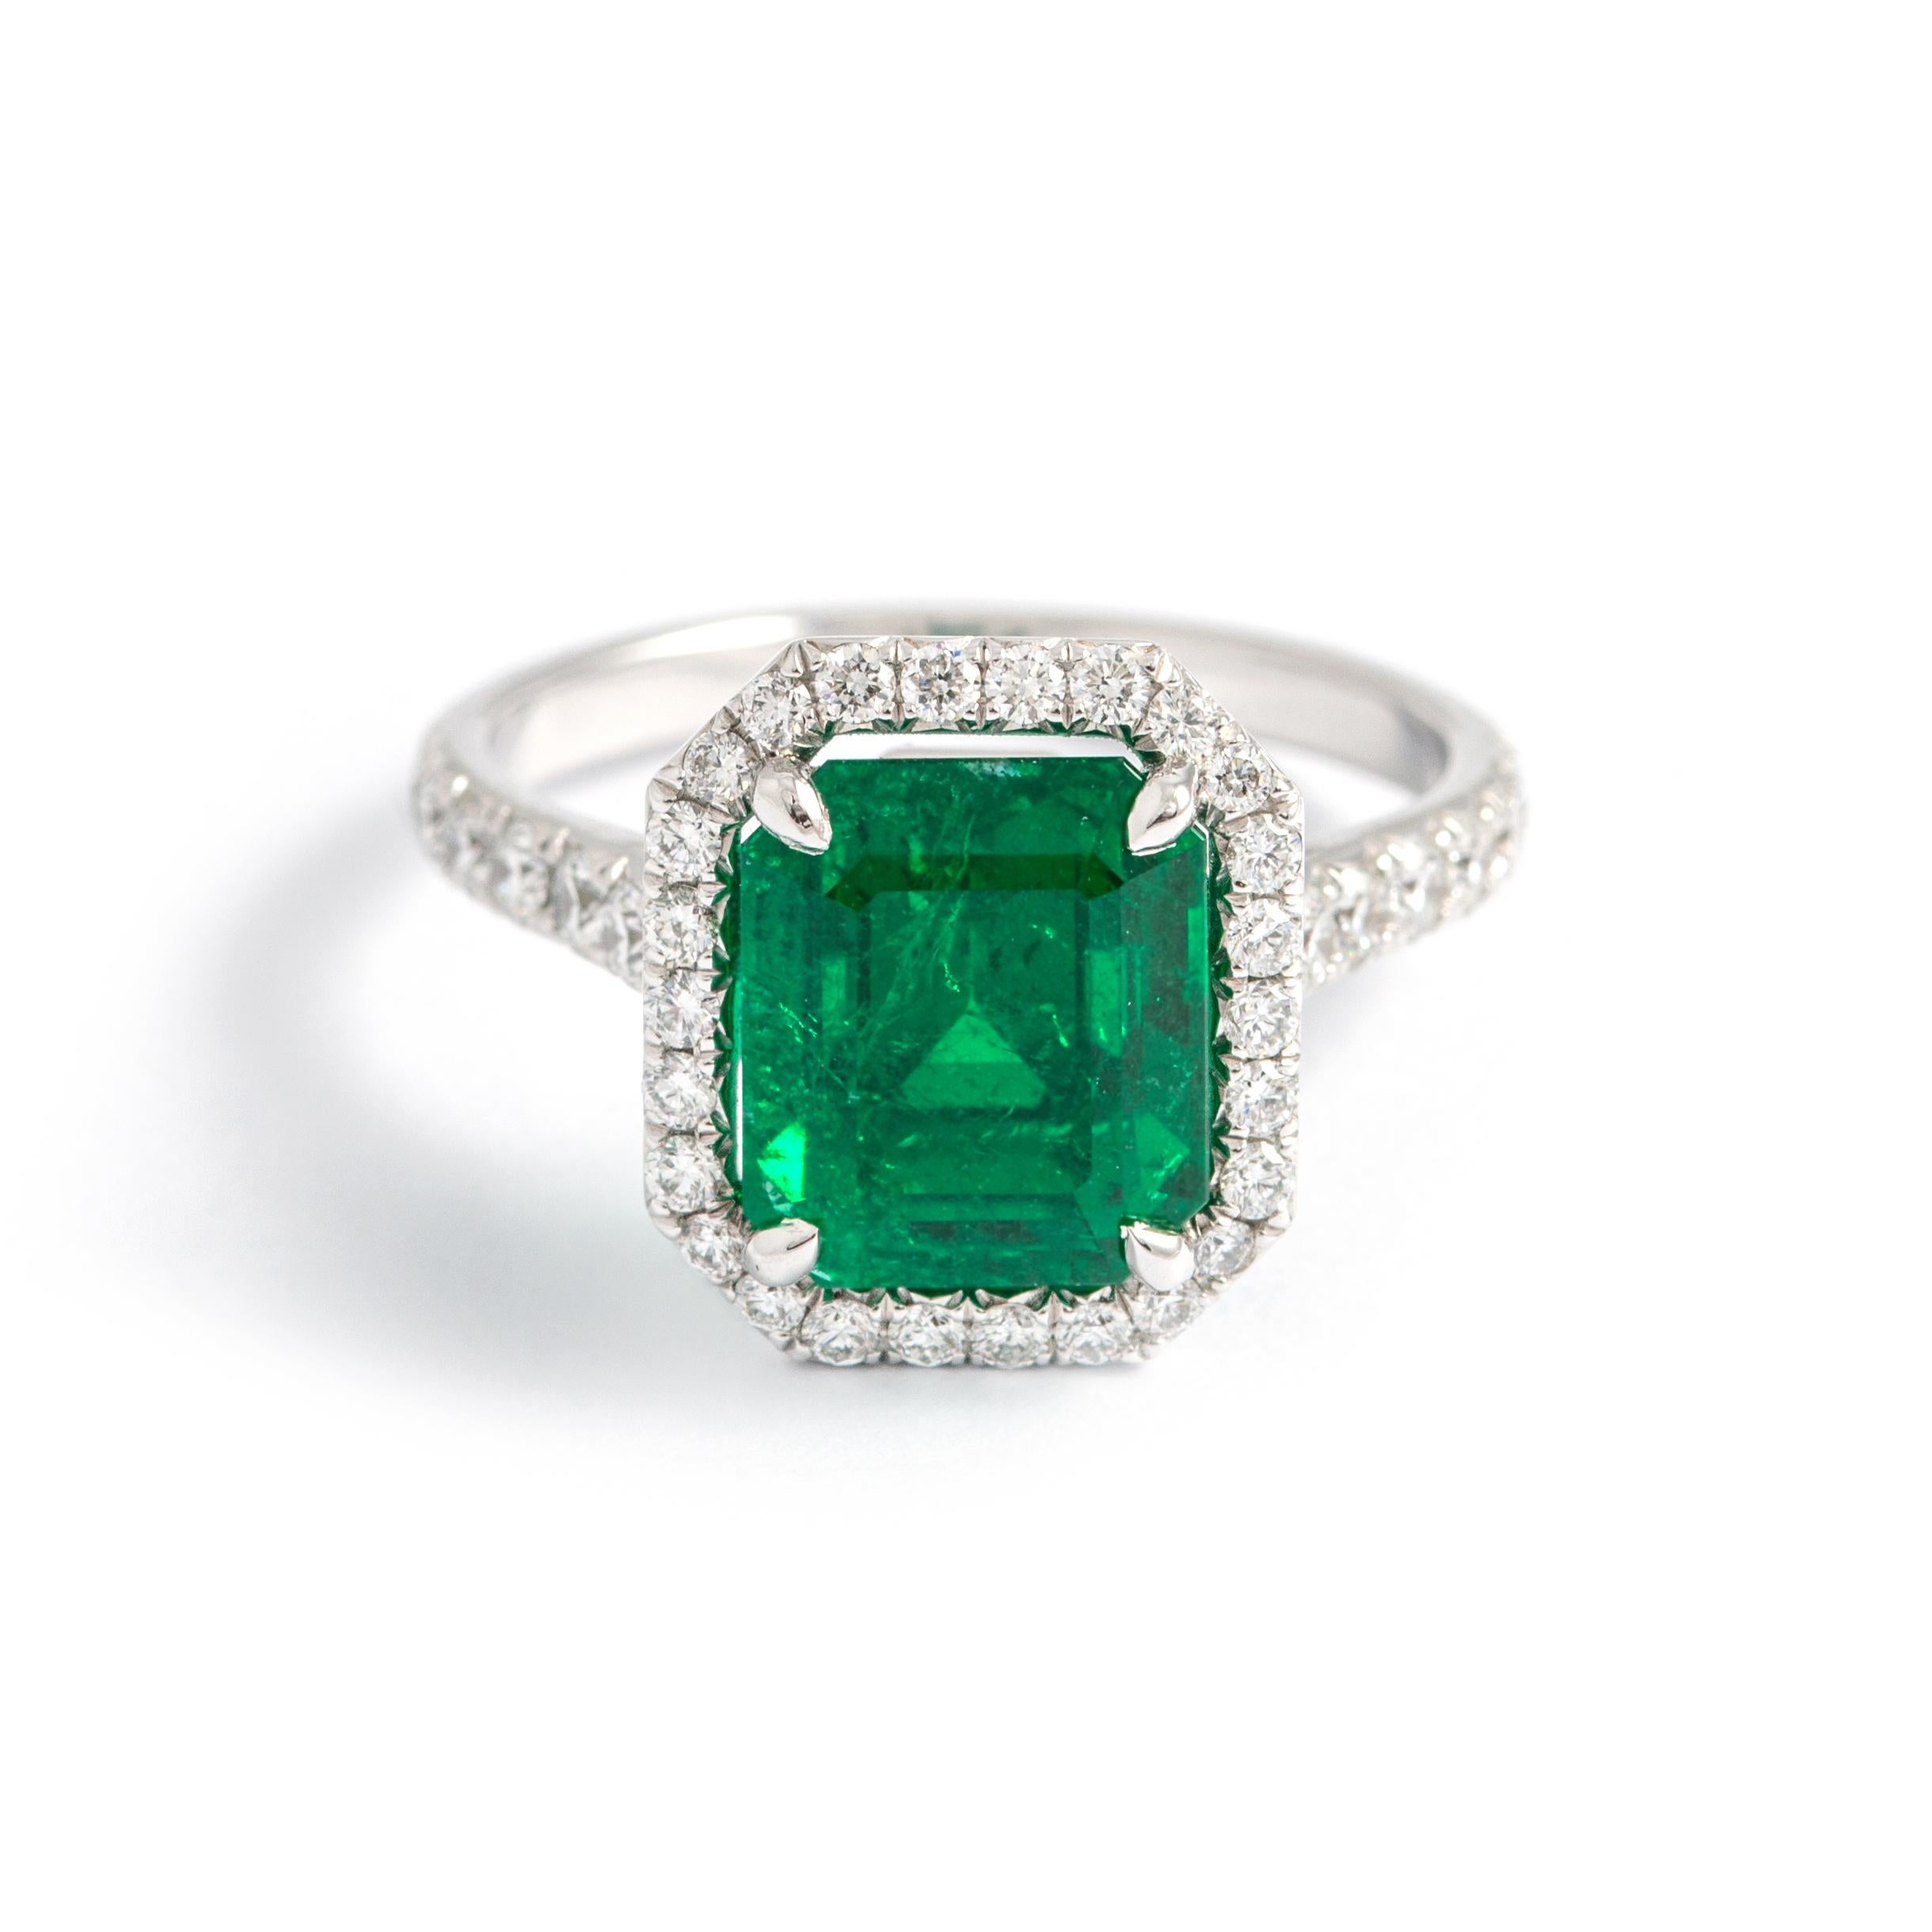 3.85 carat Emerald surrounded by Diamond white gold Ring.